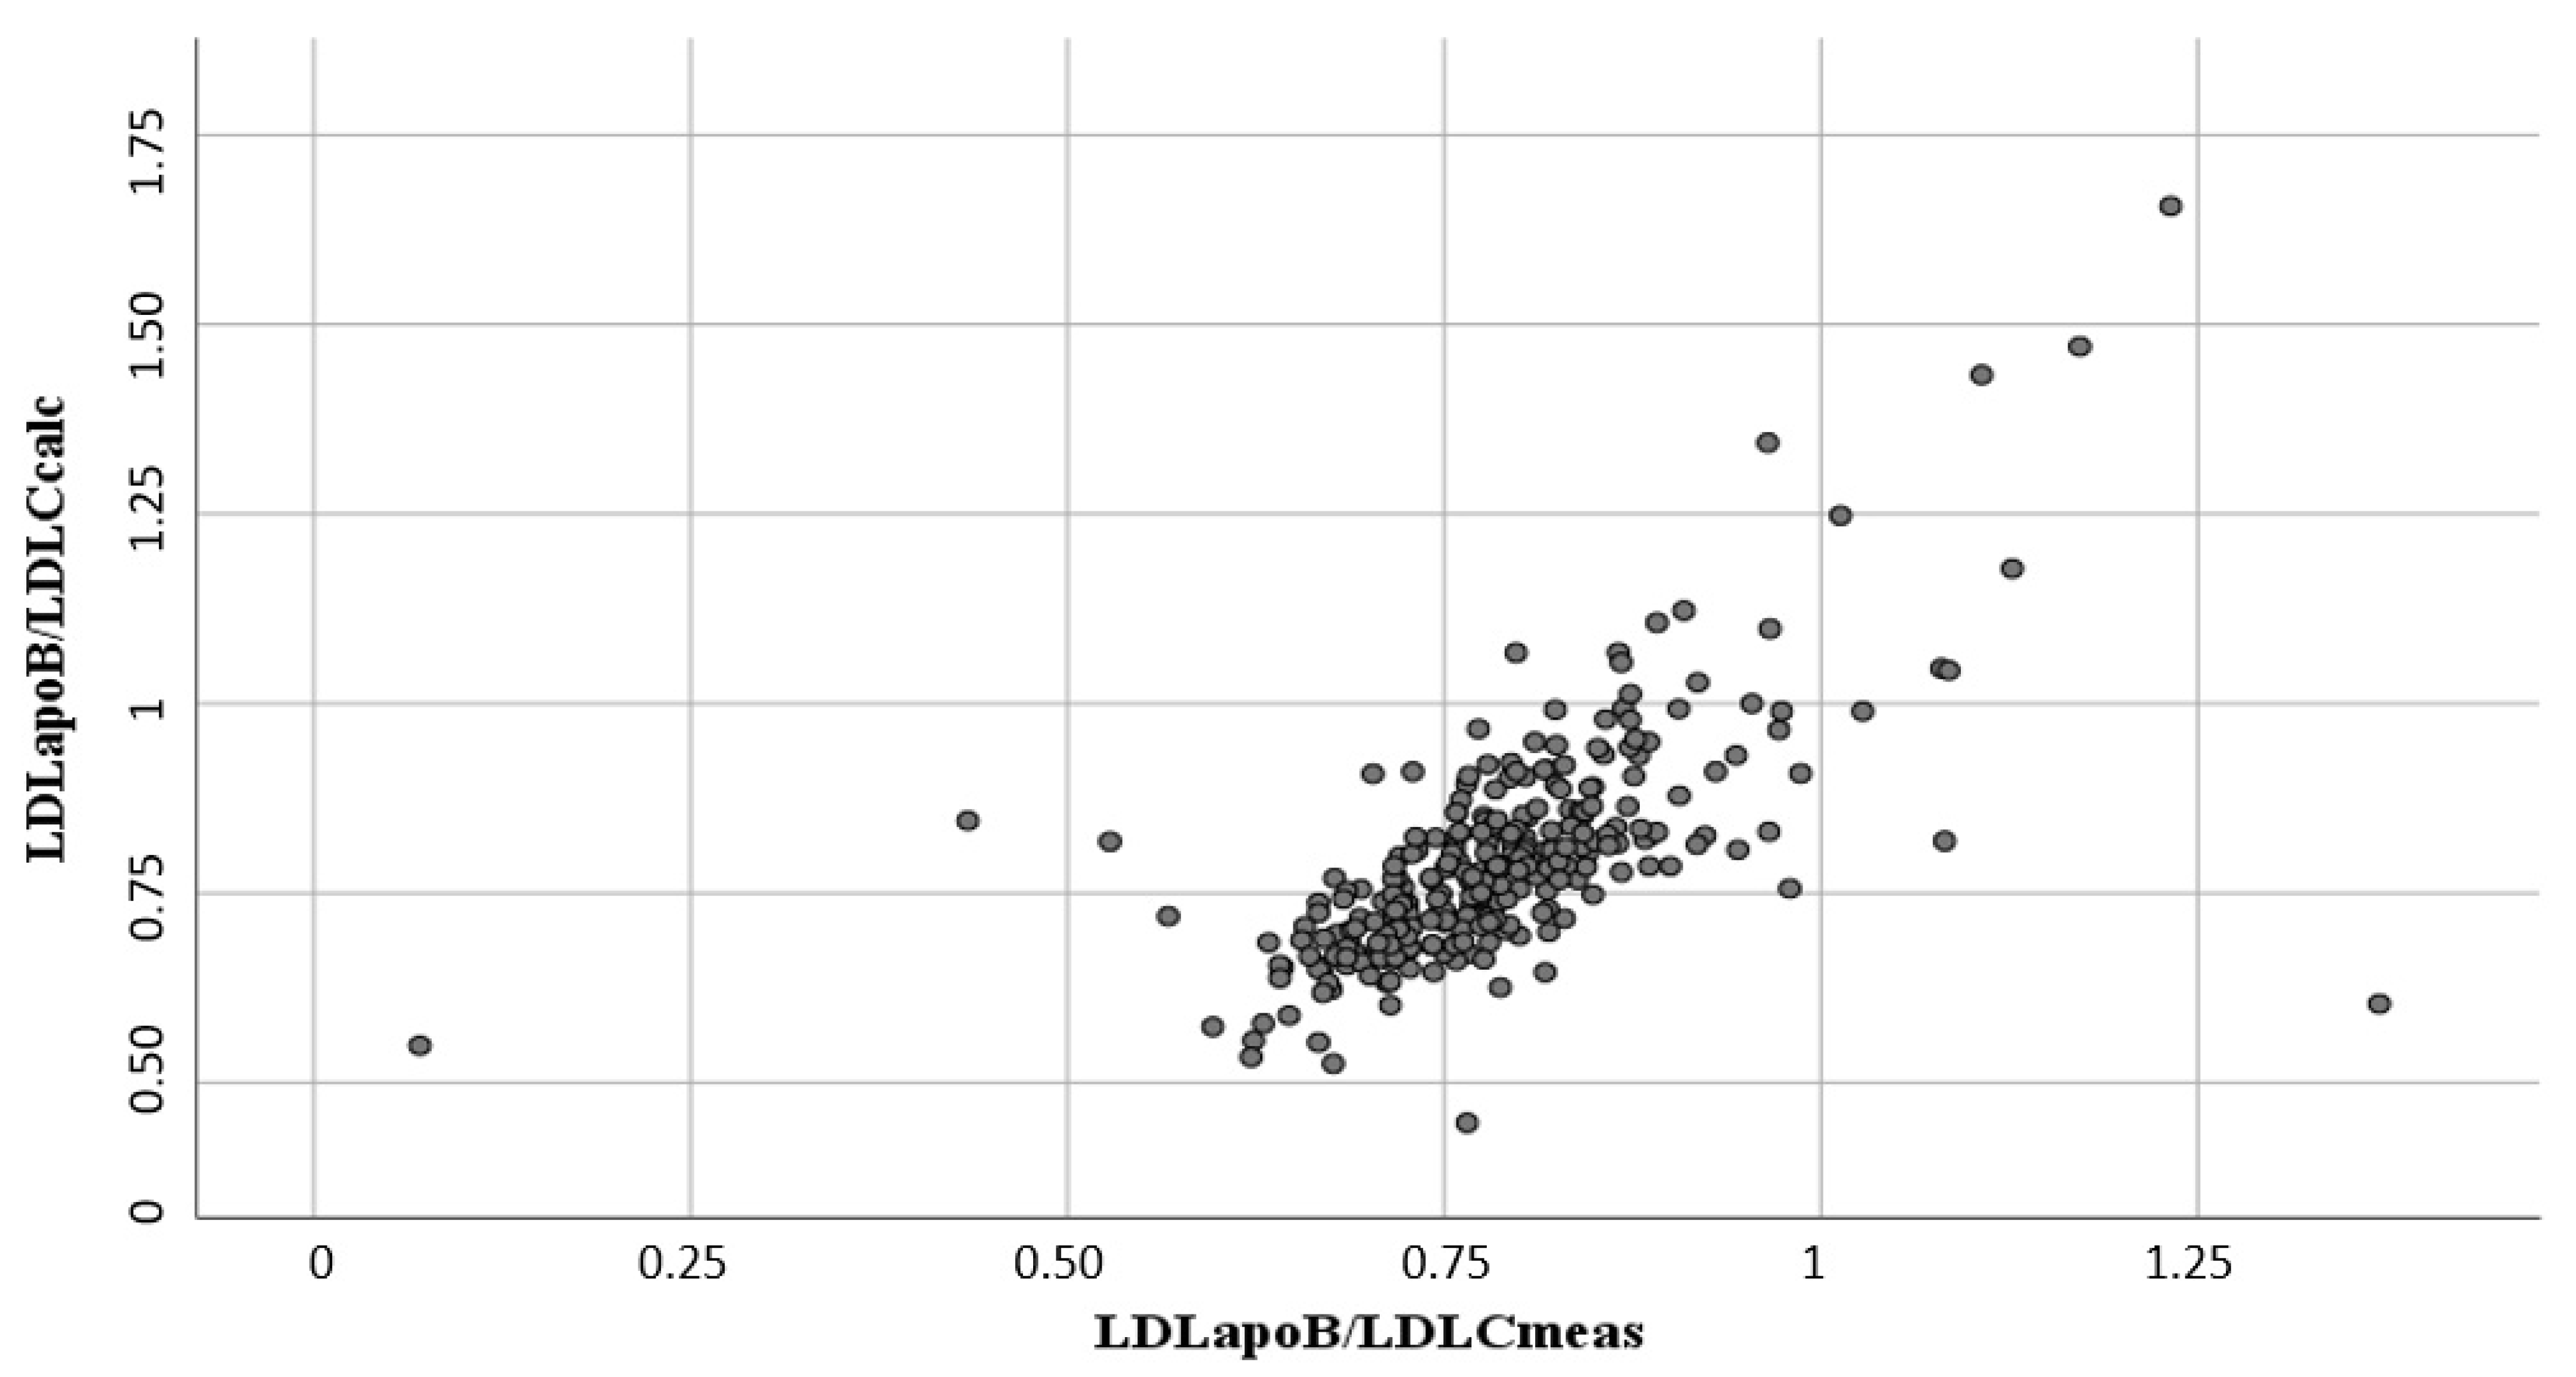 Biomedicines | Free Full-Text | The LDL Apolipoprotein B-to-LDL Cholesterol  Ratio: Association with Cardiovascular Mortality and a Biomarker of Small,  Dense LDLs